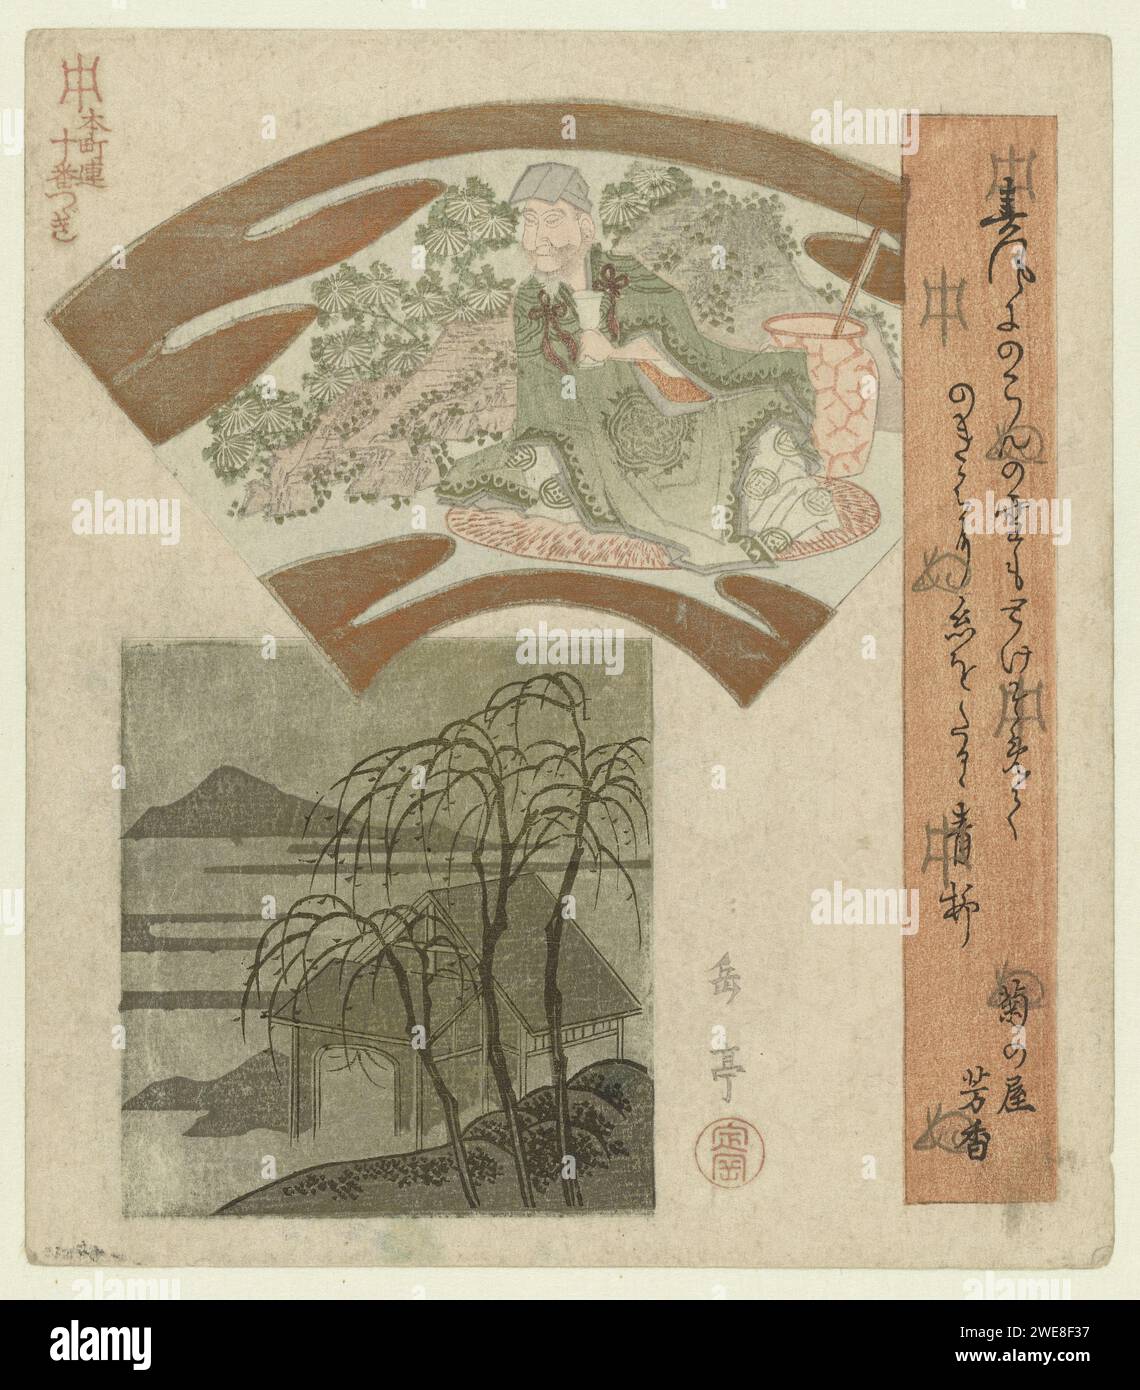 A Chinese philosopher and landscape with willows, Yashima Gakutei, c. 1822  In a fan-shaped cartouche, a Chinese philosopher is depicted, drinking wine from a large barrel, against a background of chrysanthemums on a mountain. The square cartouche shows a landscape with willows and a pavilion. With one poem. Japan paper color woodcut trees: willow Stock Photo